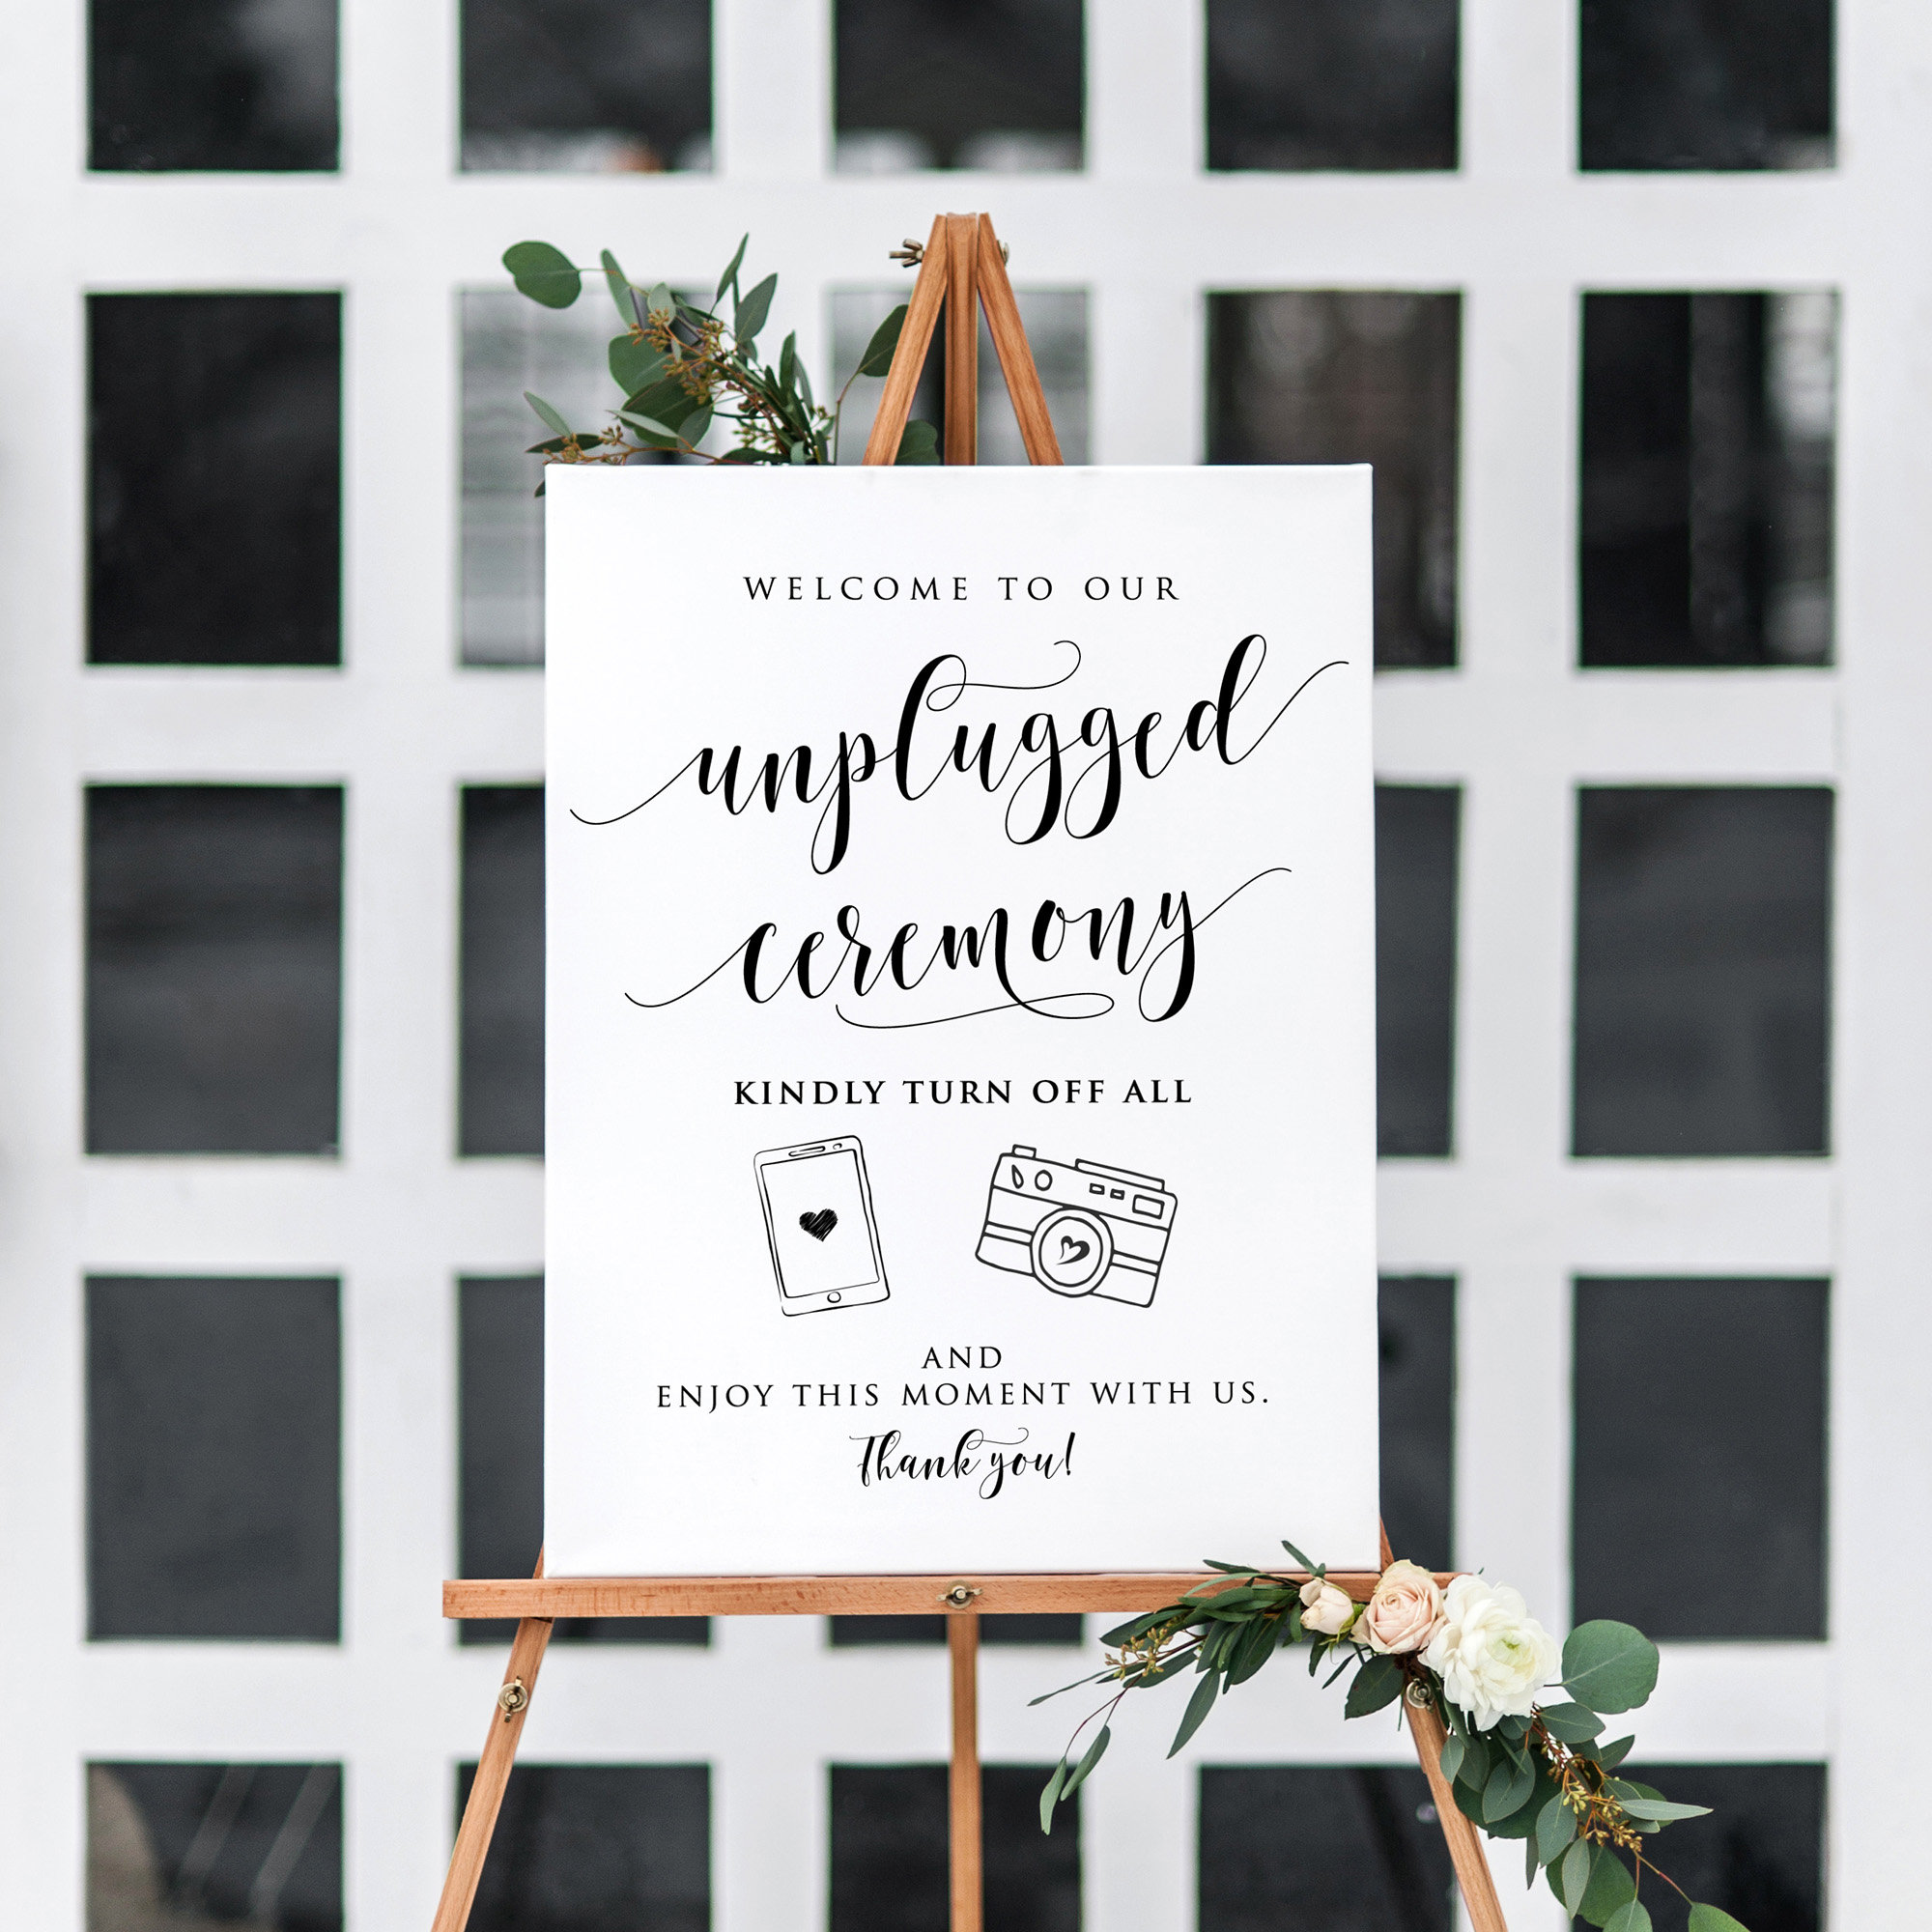 ceremony sign guest notice gold wedding wedding Unplugged ceremony 